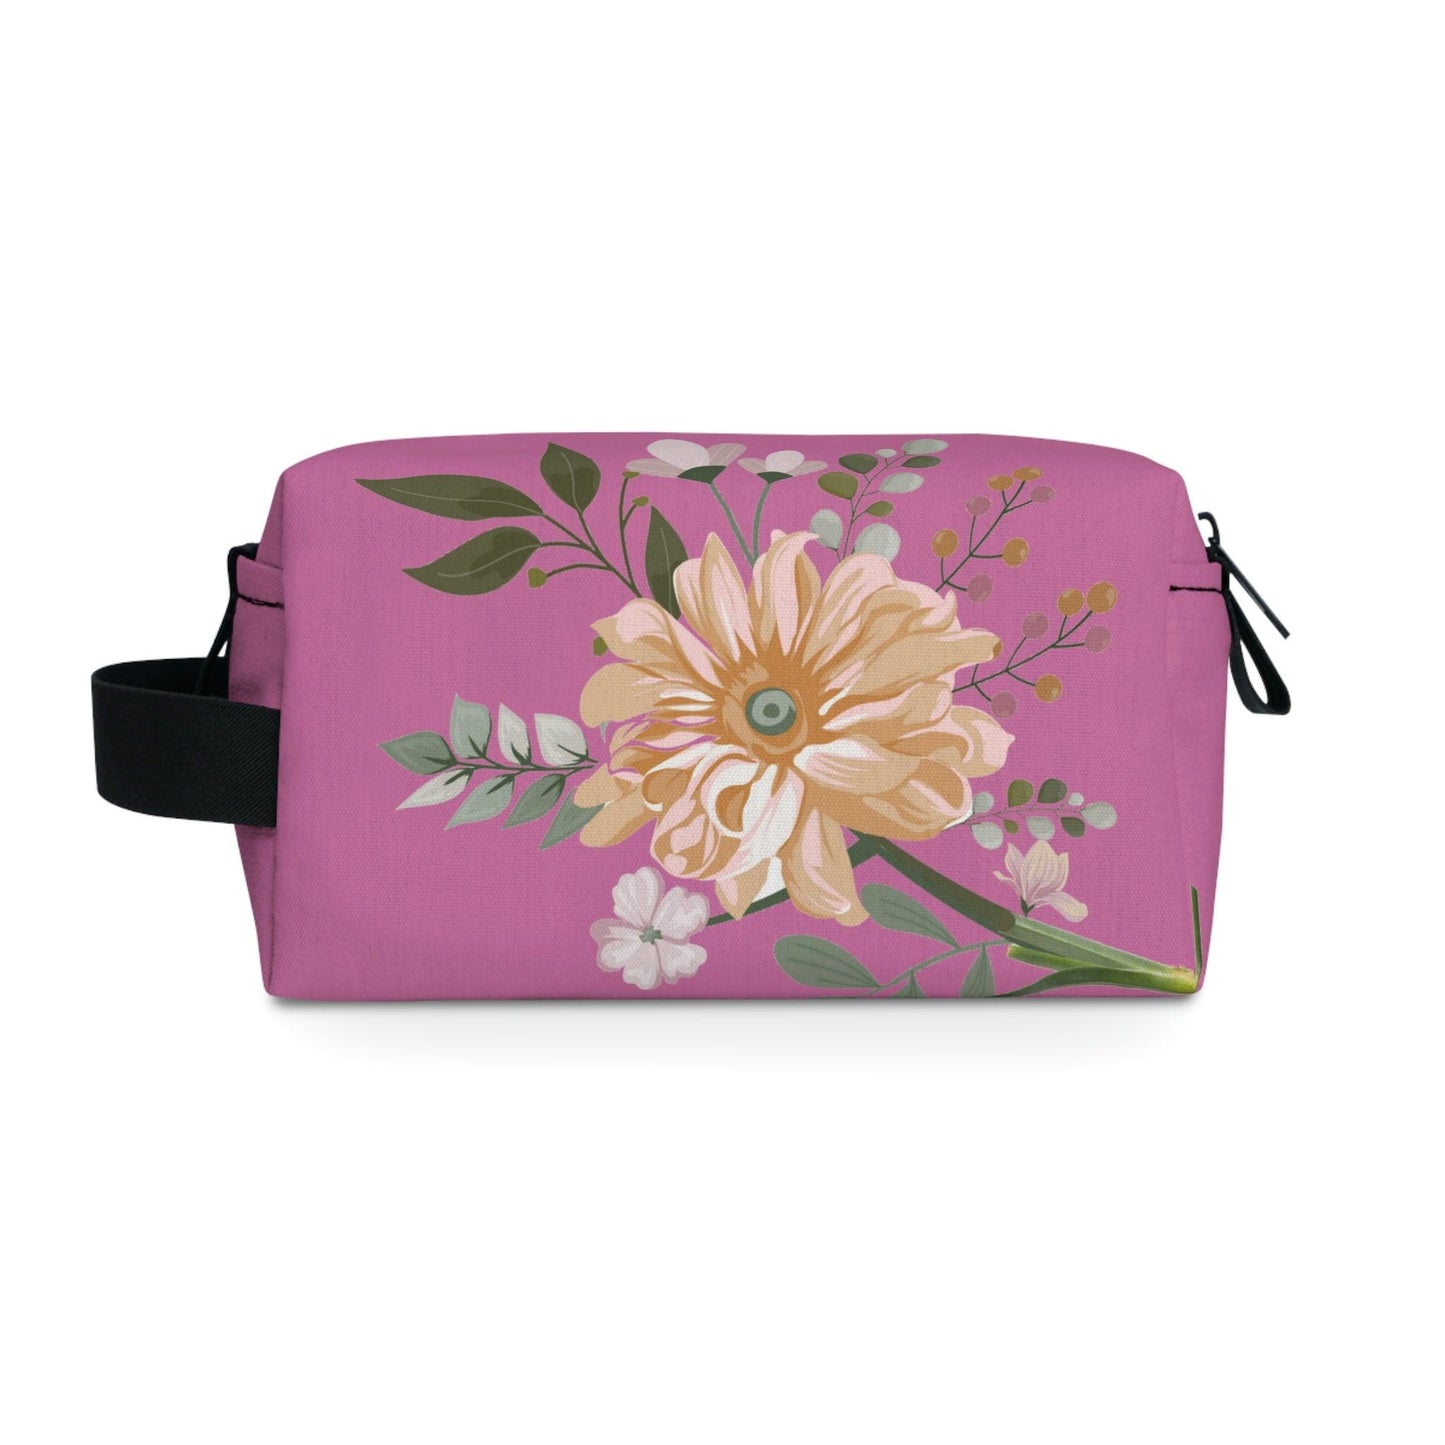 Makeup Bags Cosmetic Bag | Floral Makeup Bag - floral Toiletry Bag | makeup pouch gift for her | bridal party bags | travel bag